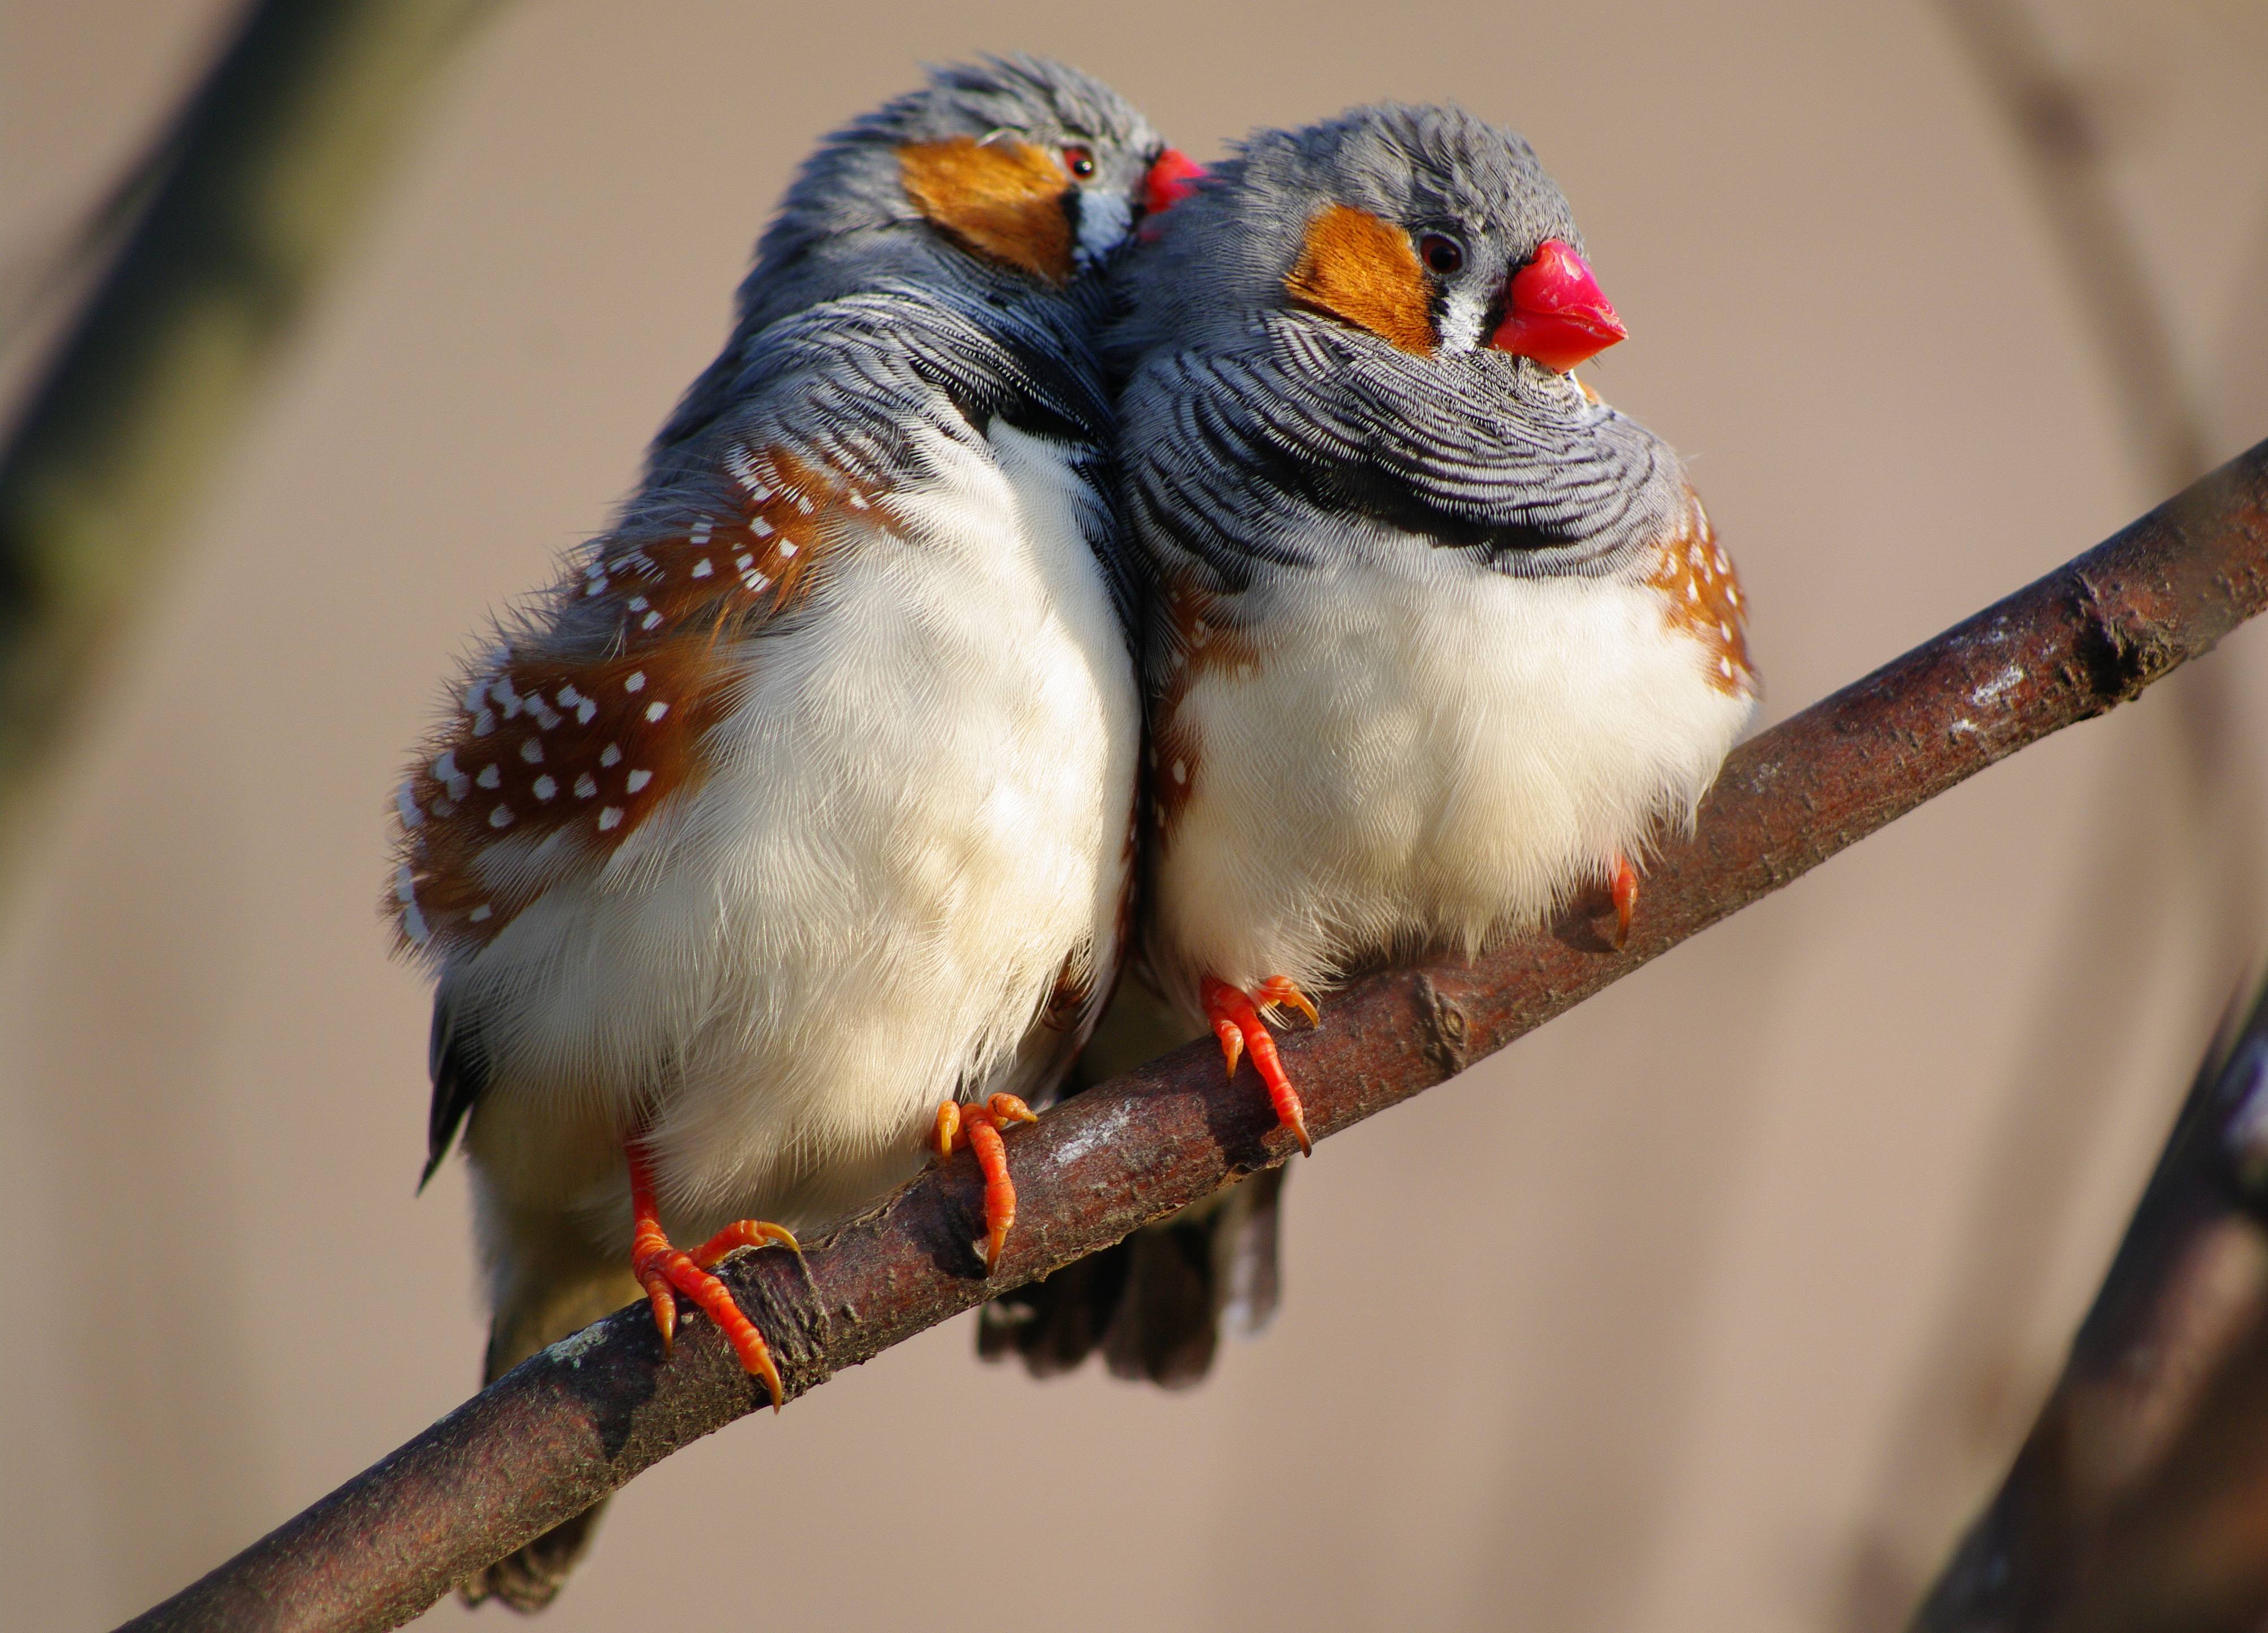 Zebra Finches Use Baby Talk To Teach Into The Void Science,Tiny House Communities In Southern California